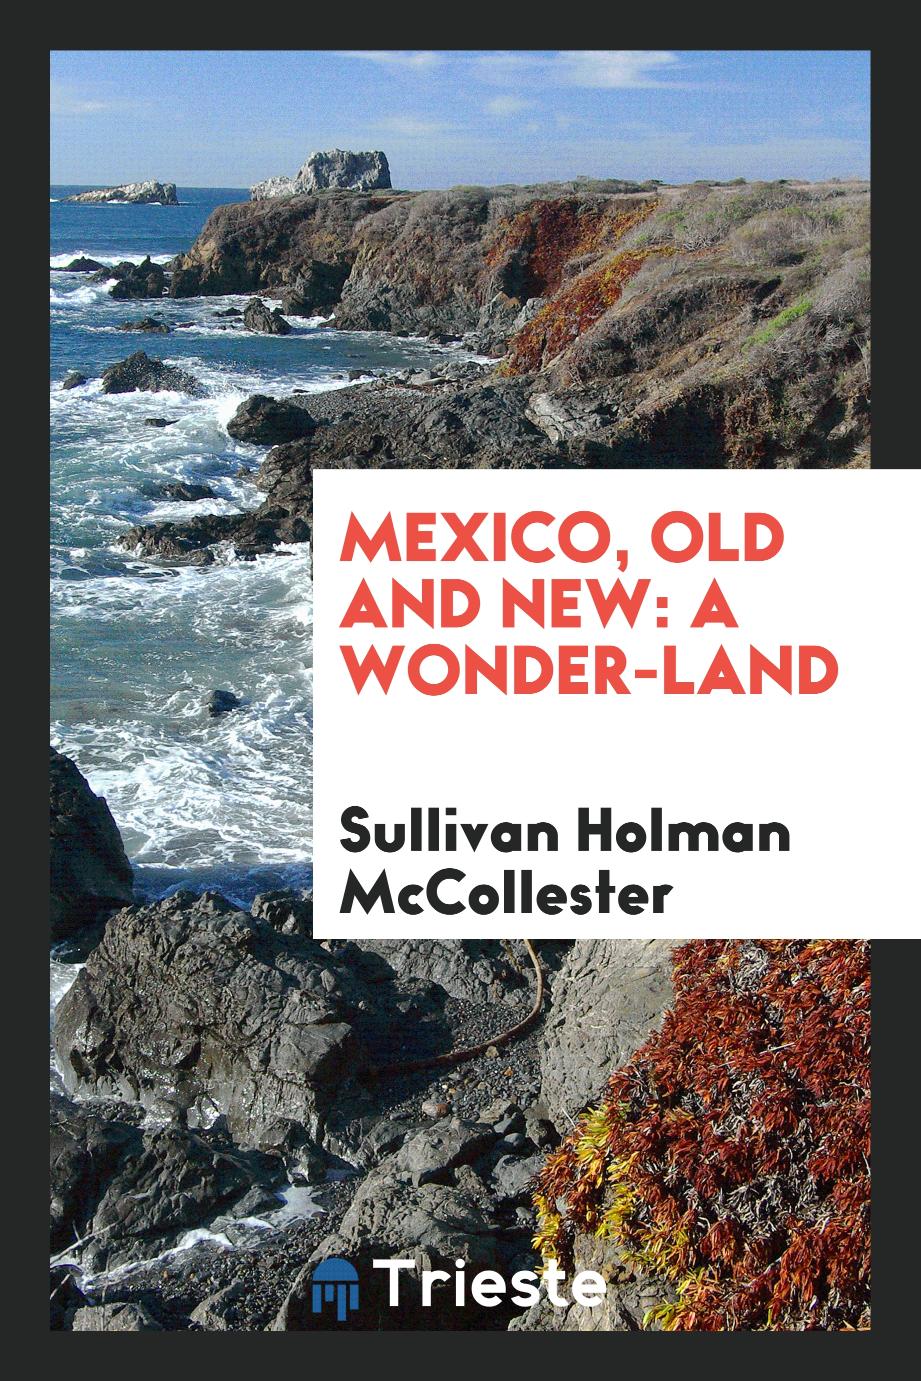 Mexico, old and new: a wonder-land